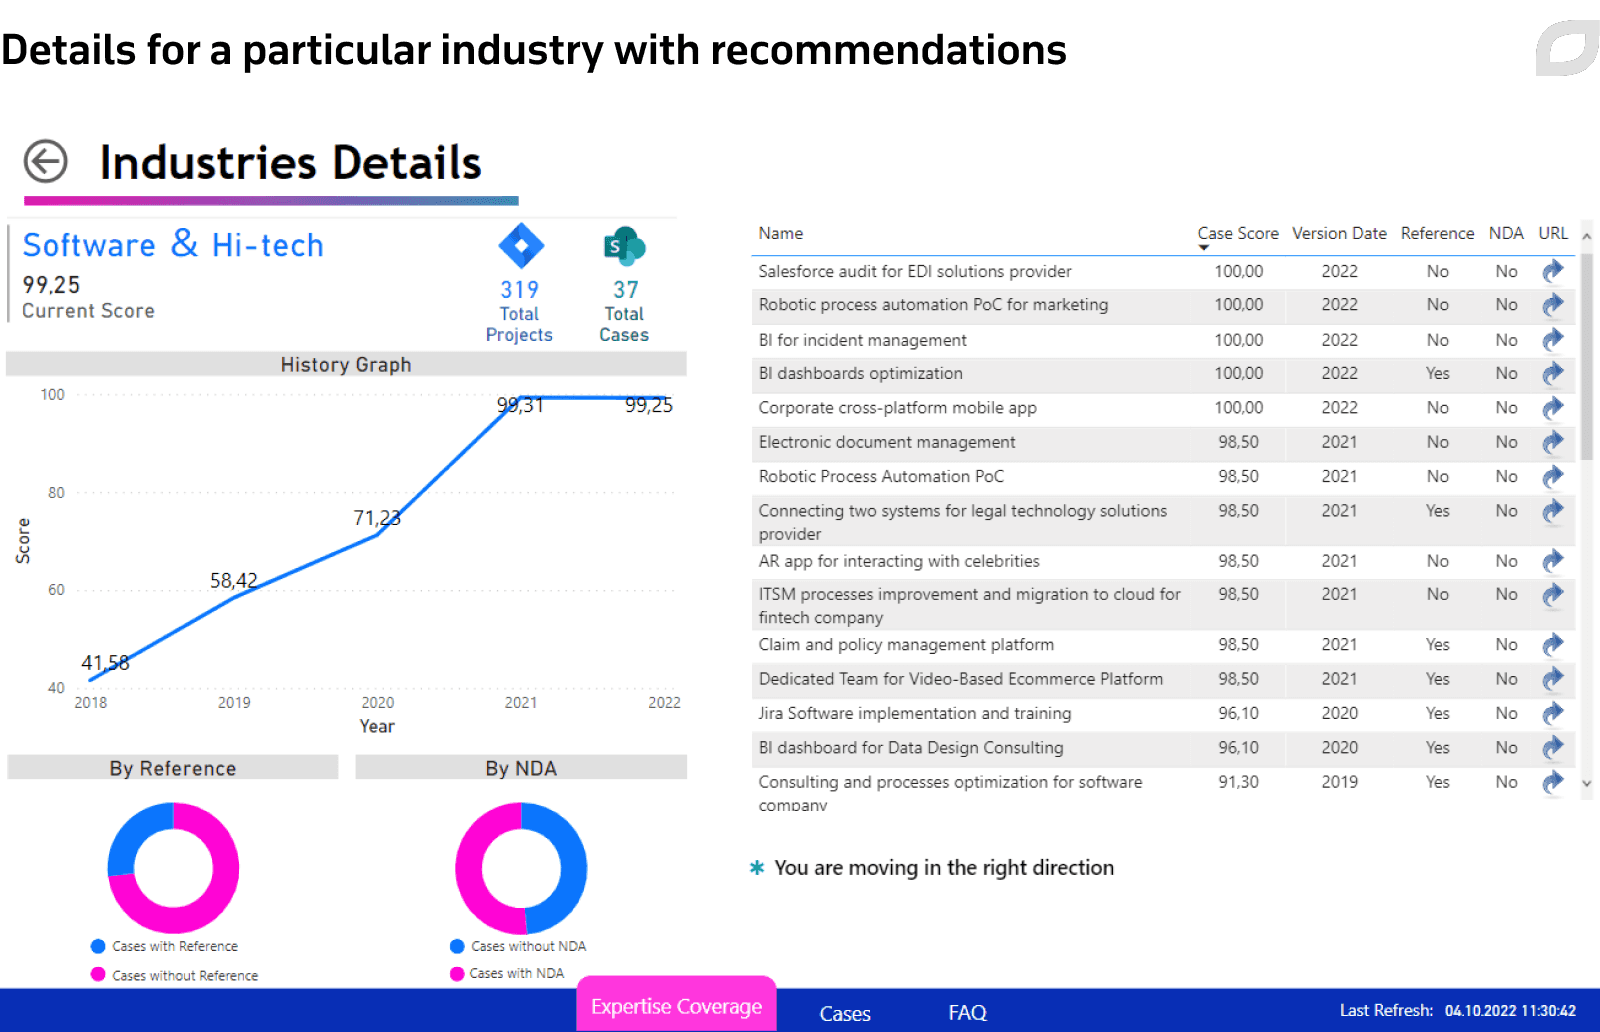 Details for a particular industry with recommendations